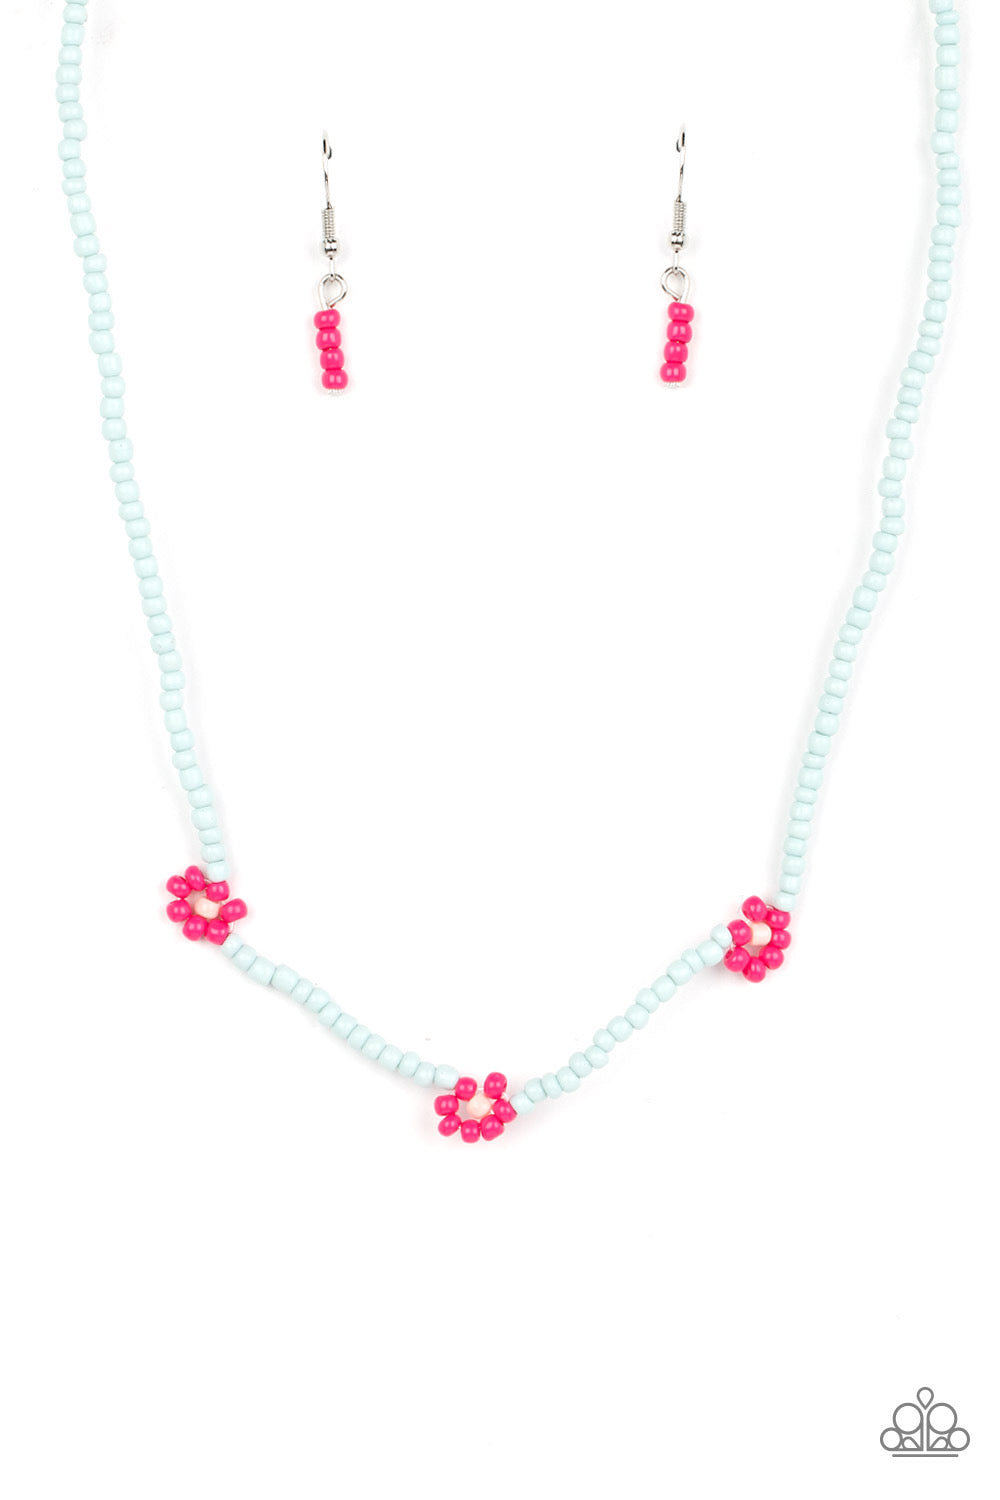 Bewitching Beading - Pink Necklace Coming Soon